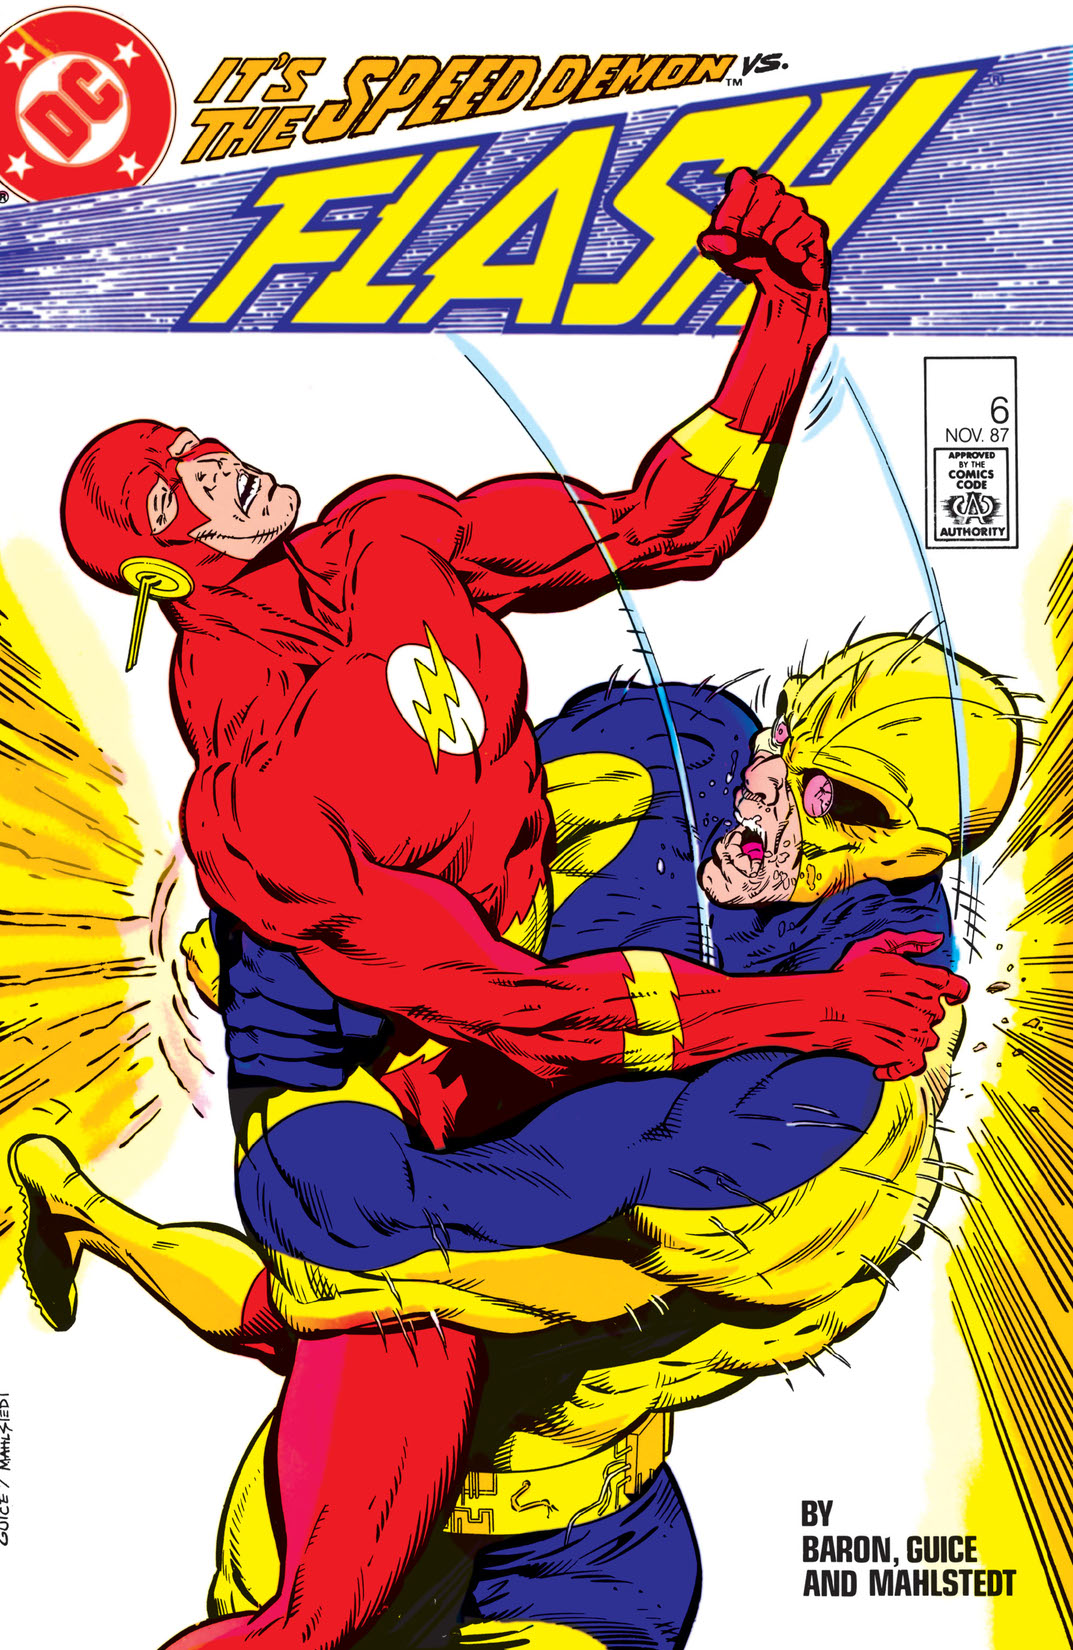 The Flash (1987-2008) #6 preview images